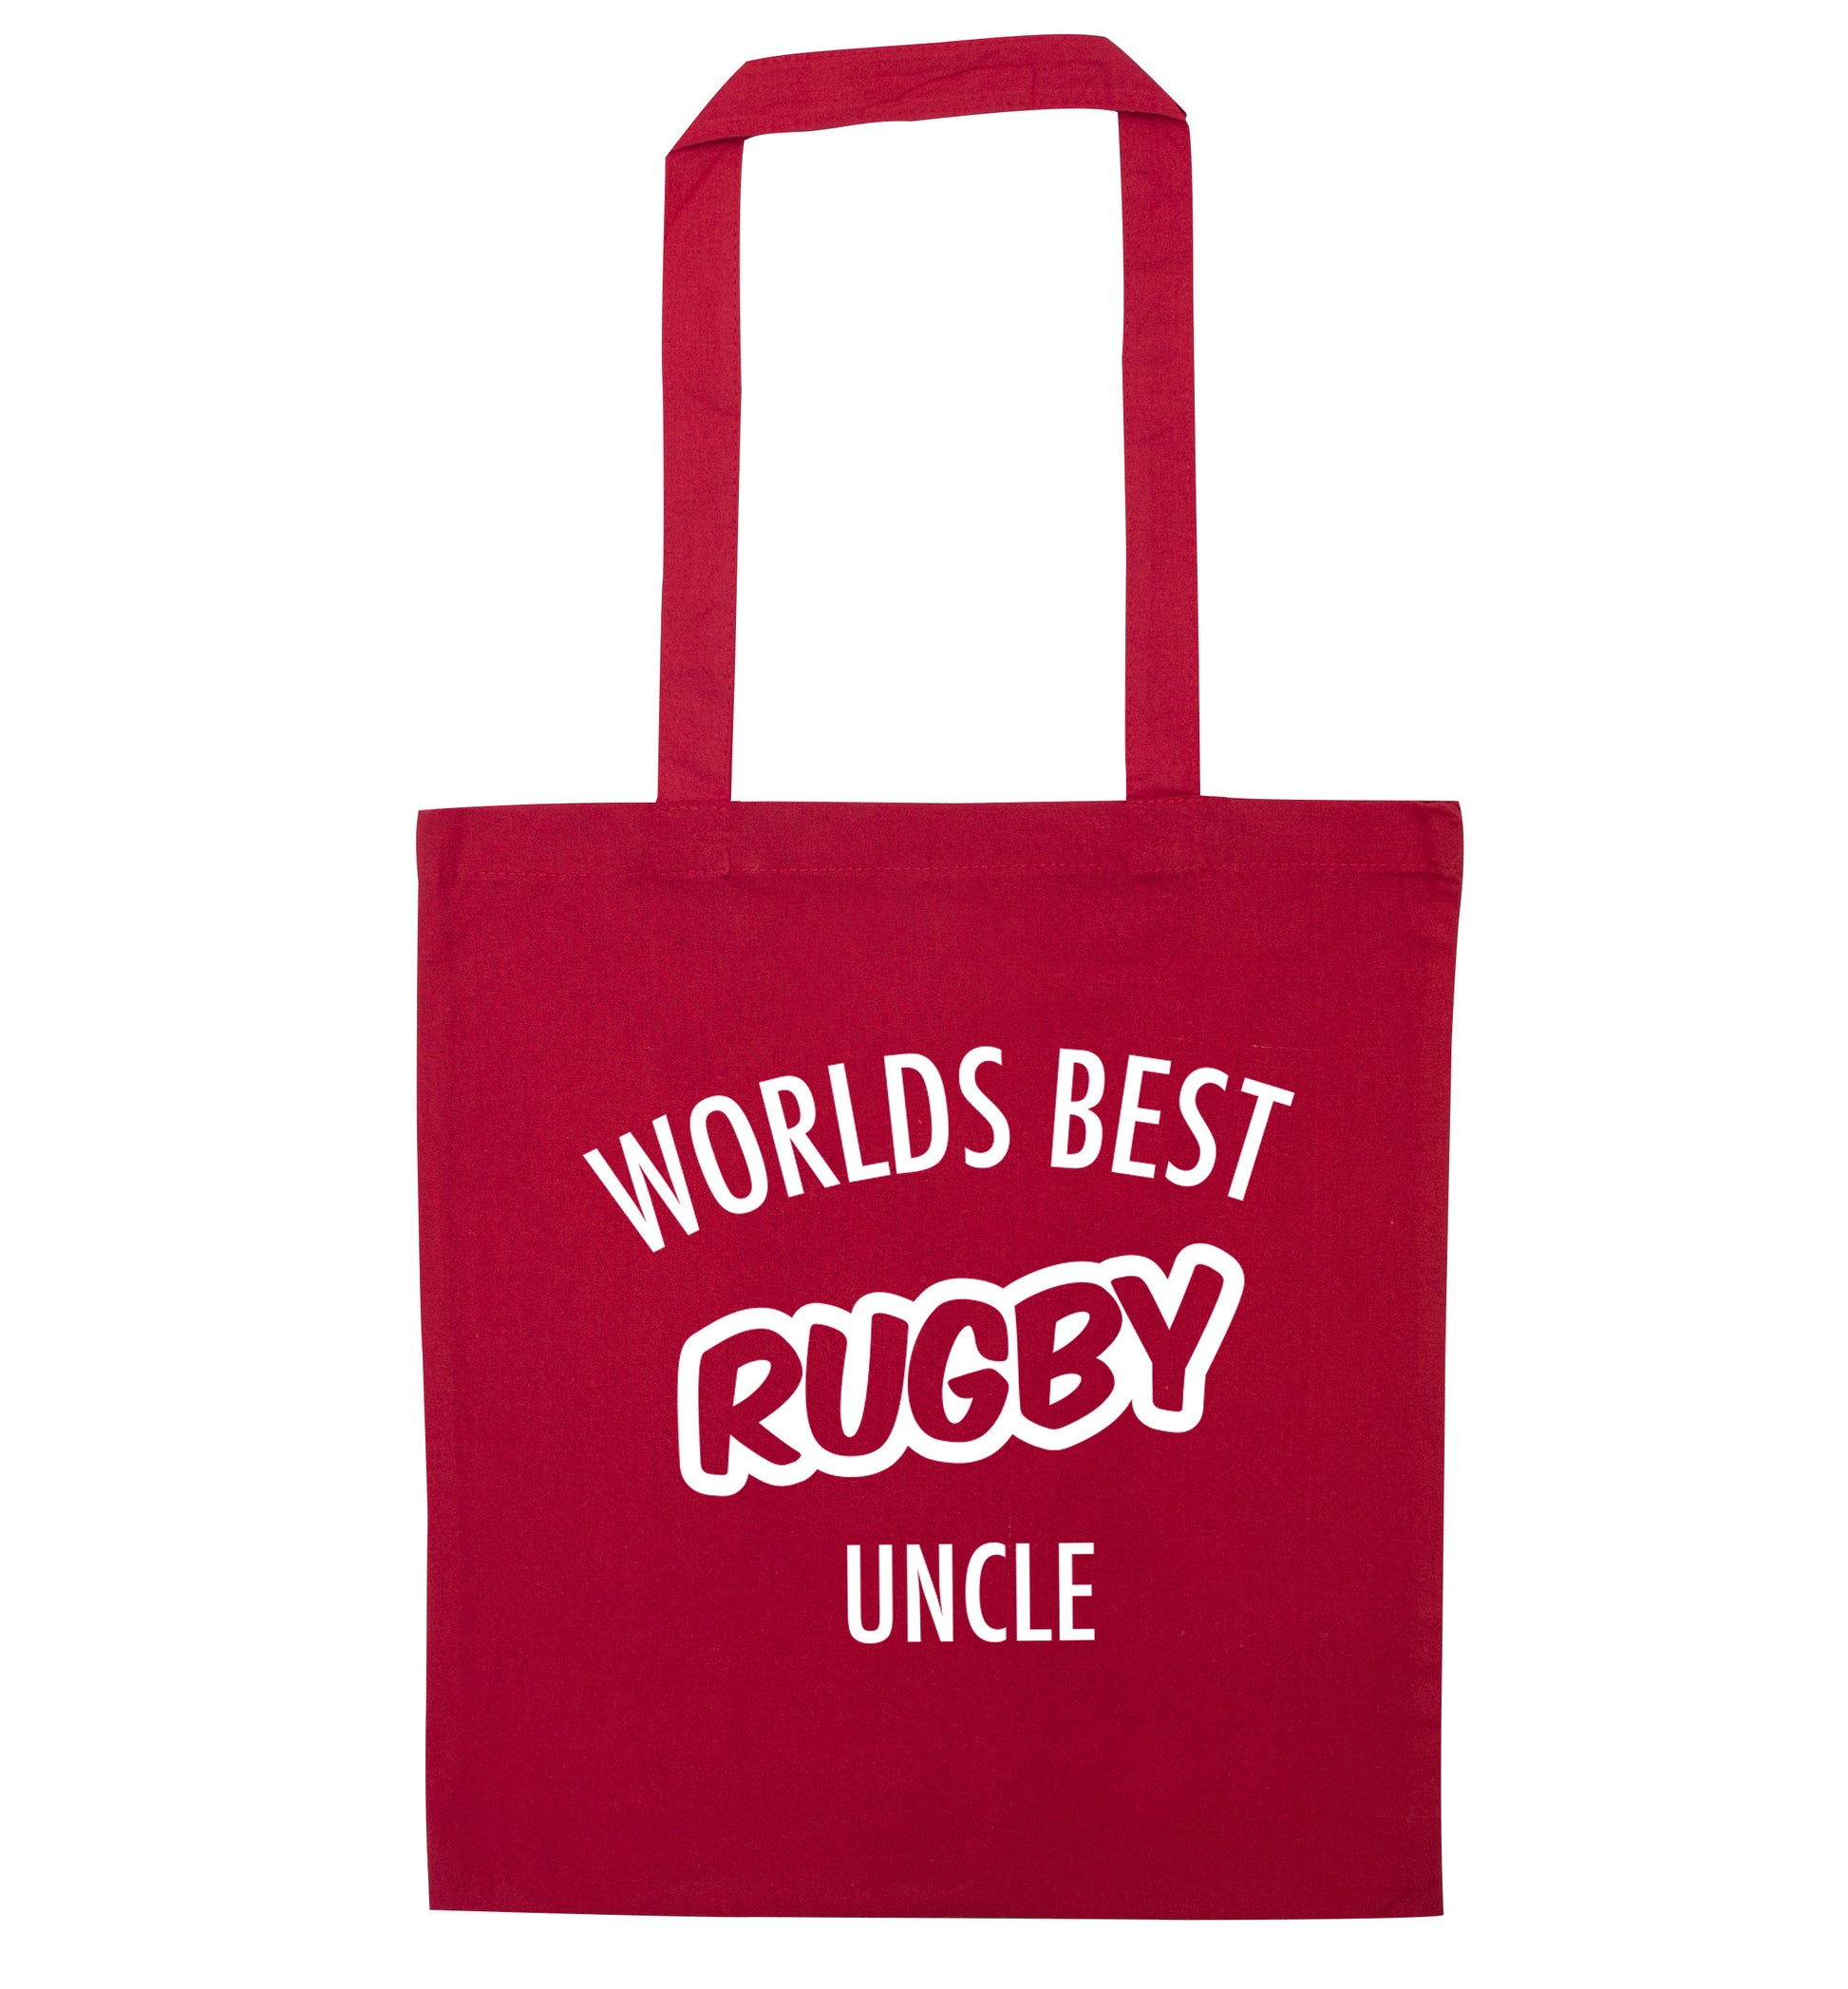 Worlds best rugby uncle red tote bag